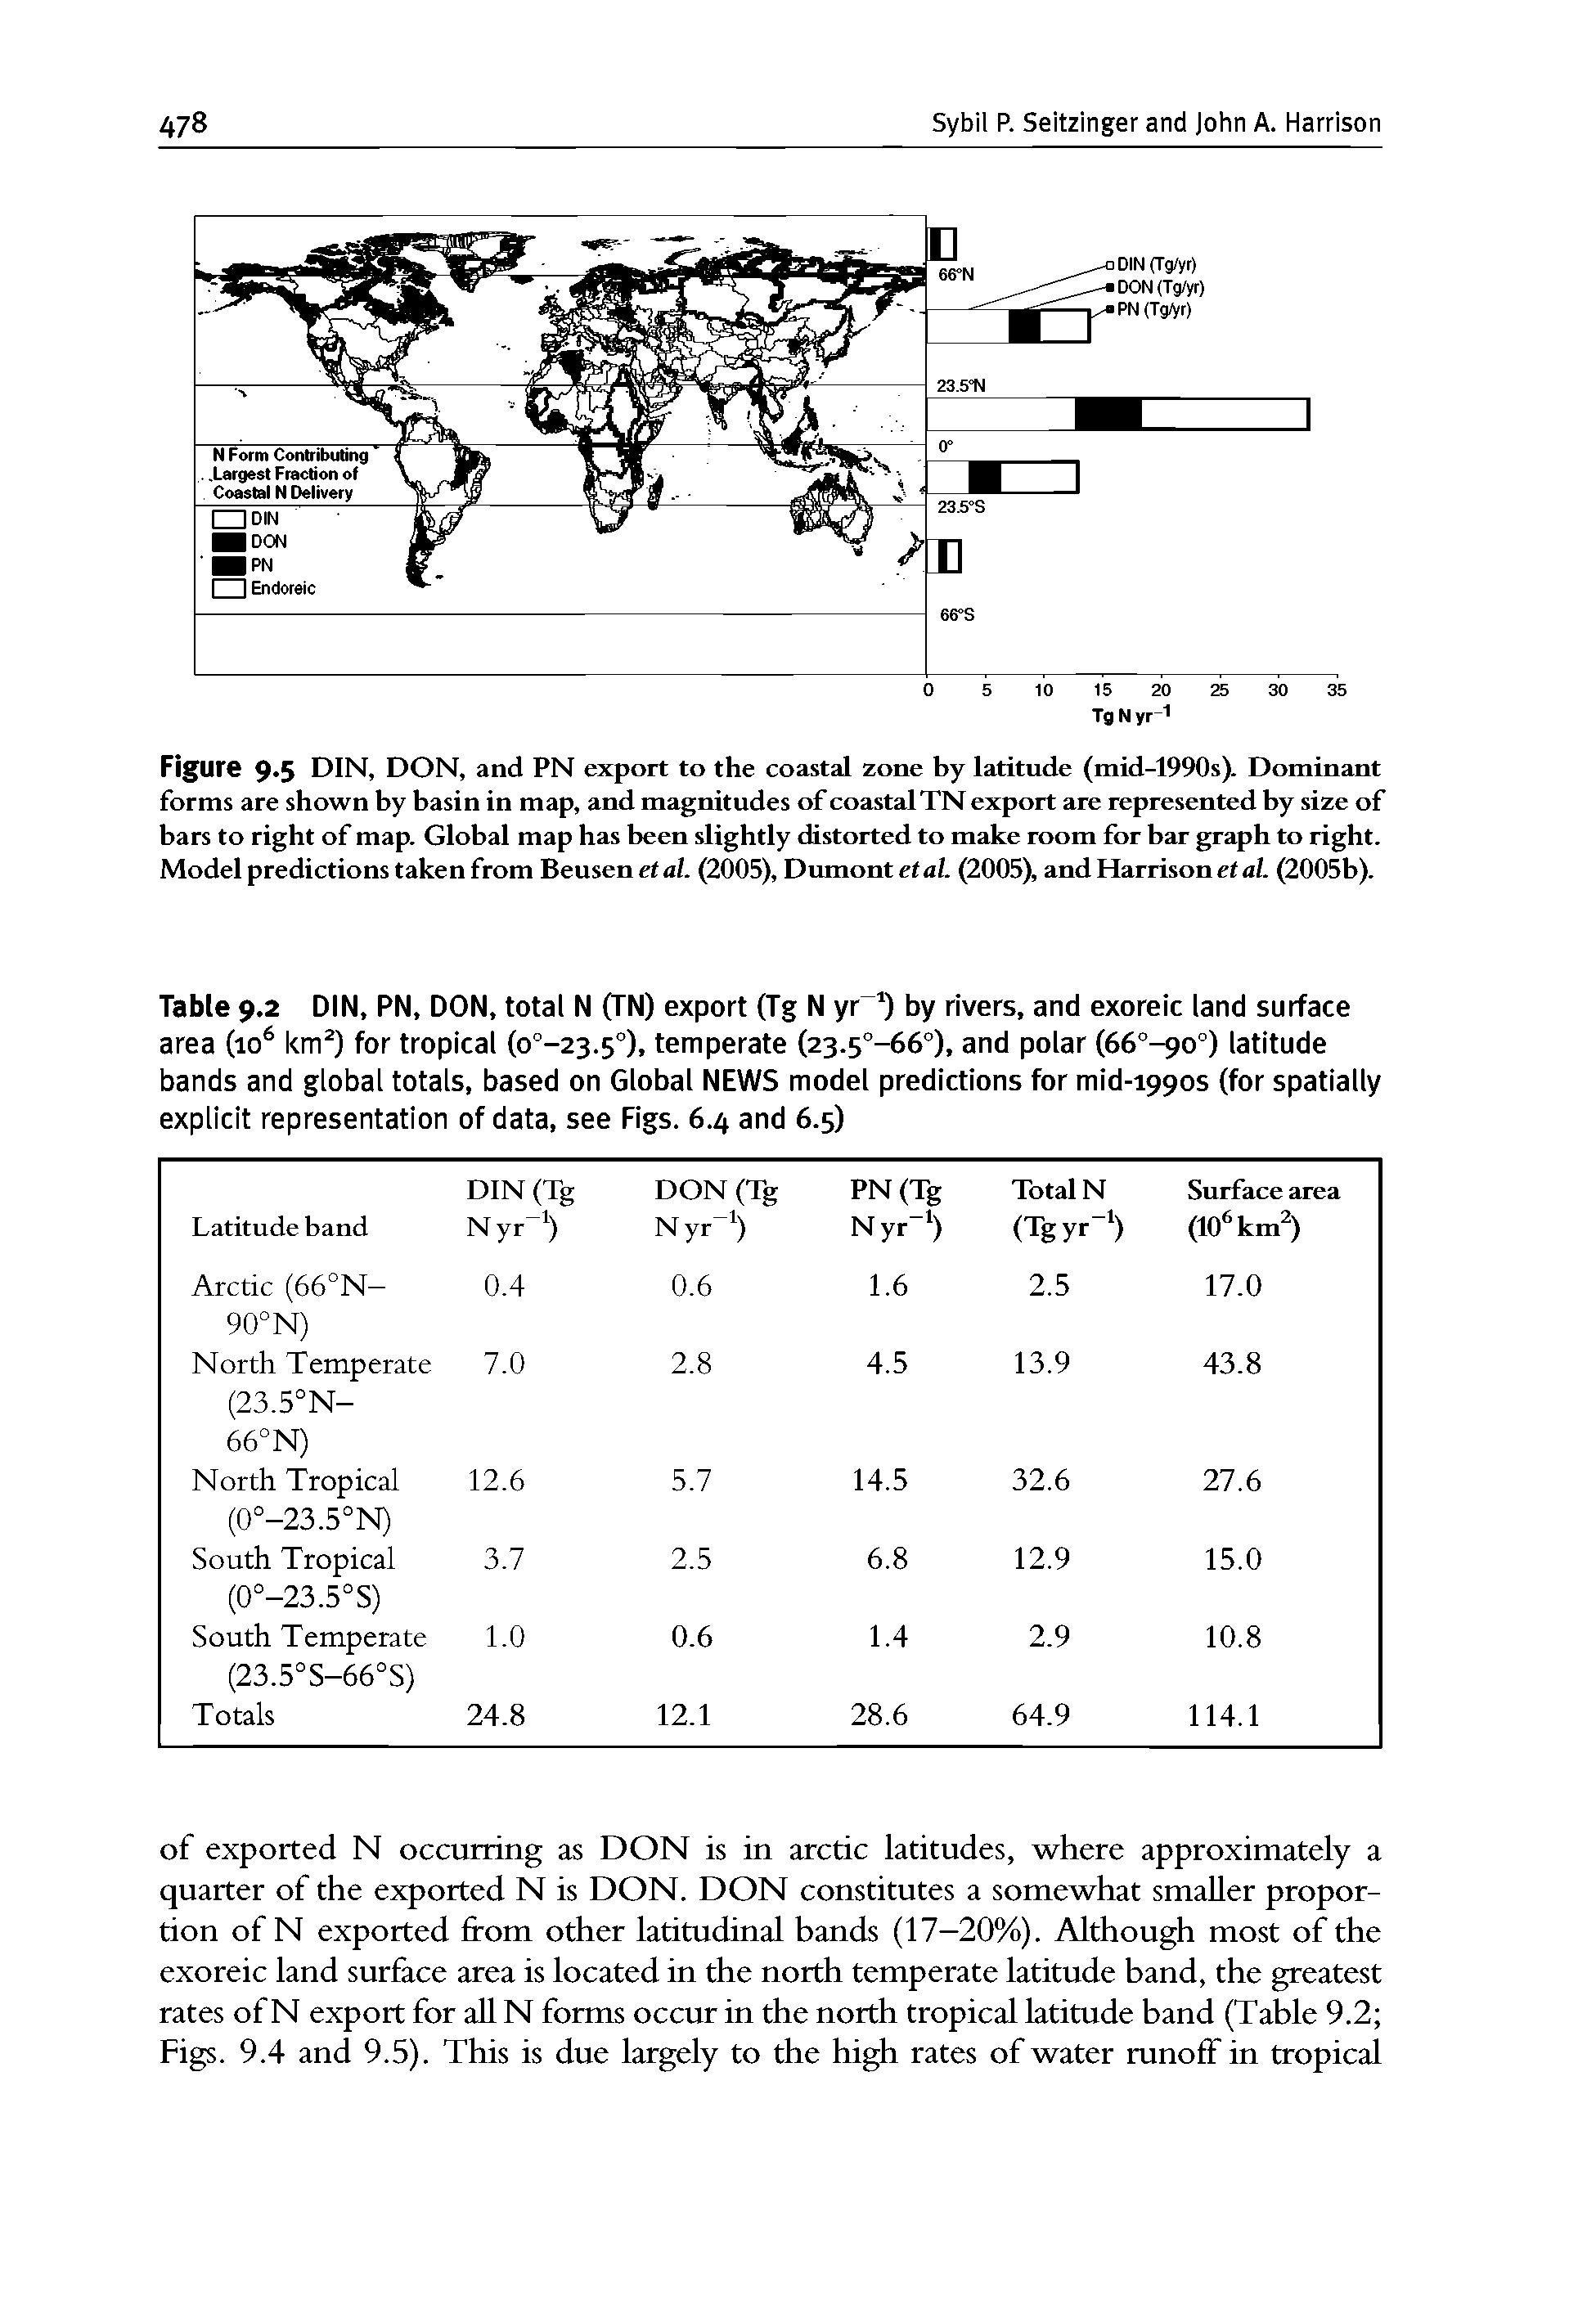 Table 9.2 DIN, PN, DON, total N (TN) export (Tg N yr ) by rivers, and exoreic land surface area (10 km ) for tropical (o°-23.5 ), temperate (23.5 -66 ), and polar (66 -90°) latitude bands and global totals, based on Global NEWS model predictions for mid-1990s (for spatially explicit representation of data, see Figs. 6.4 and 6.5)...